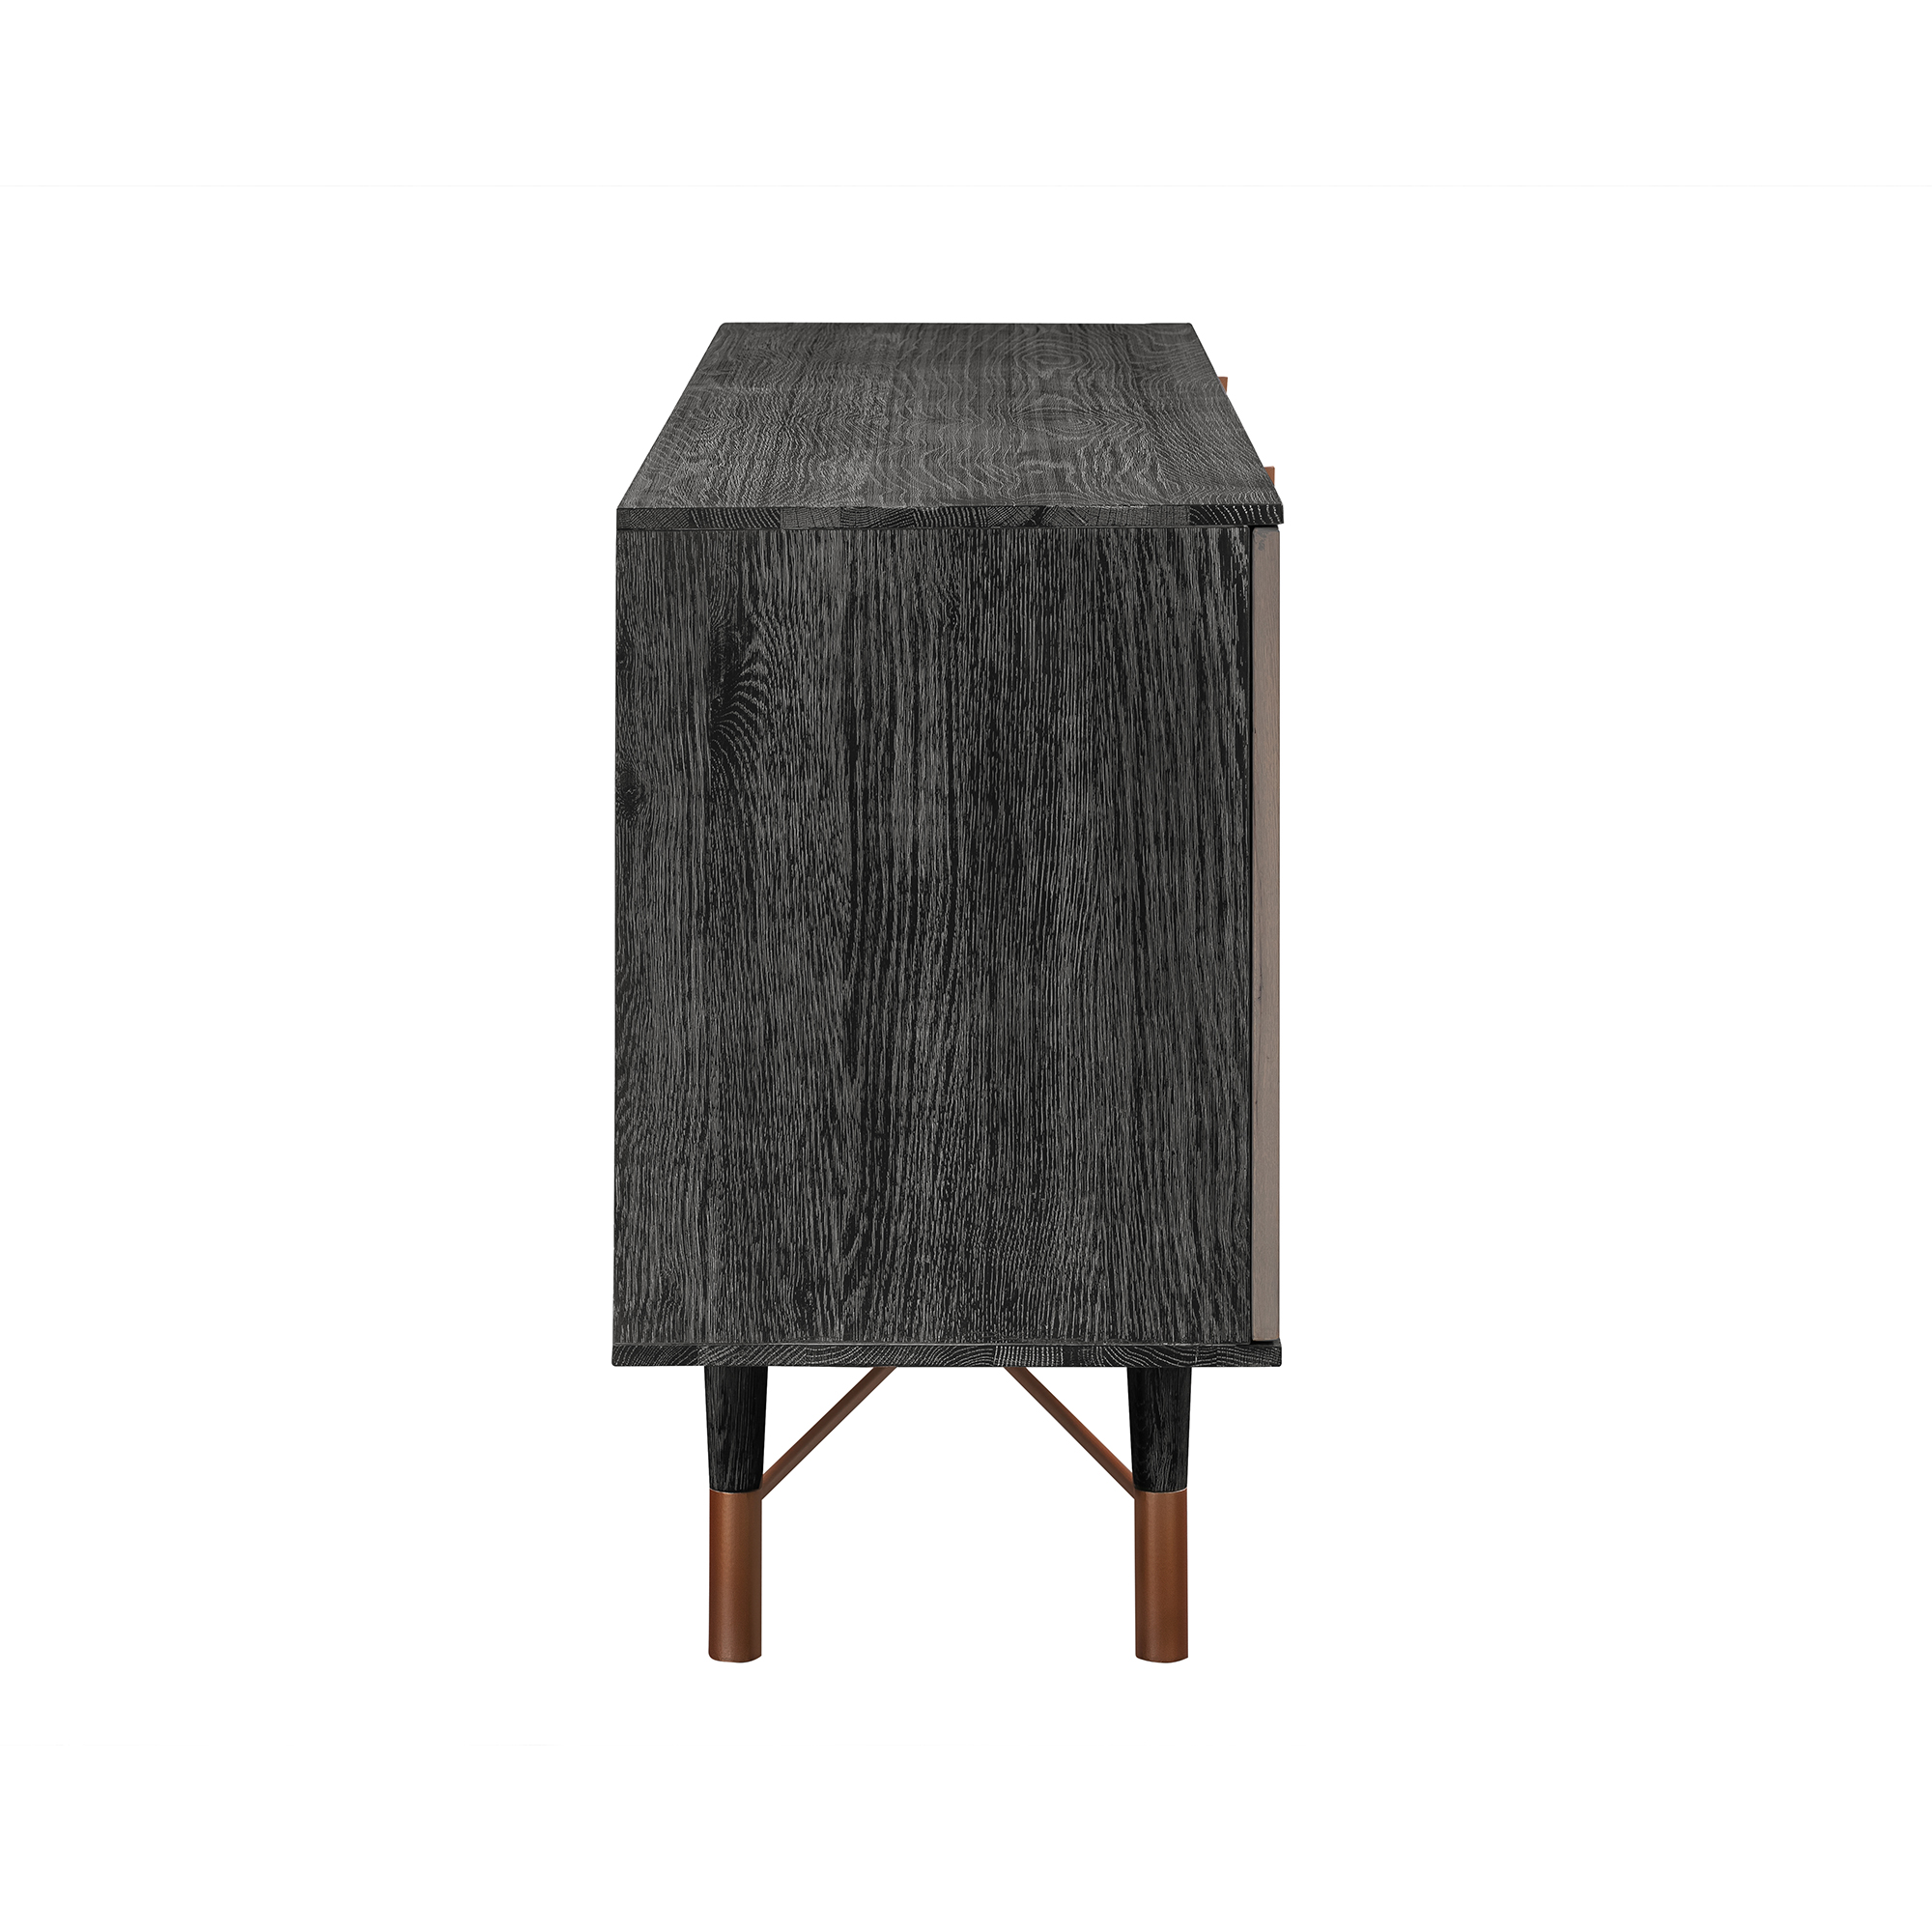 Turin Rustic Oak Wood Sideboard Cabinet with Copper Accent in Black ...